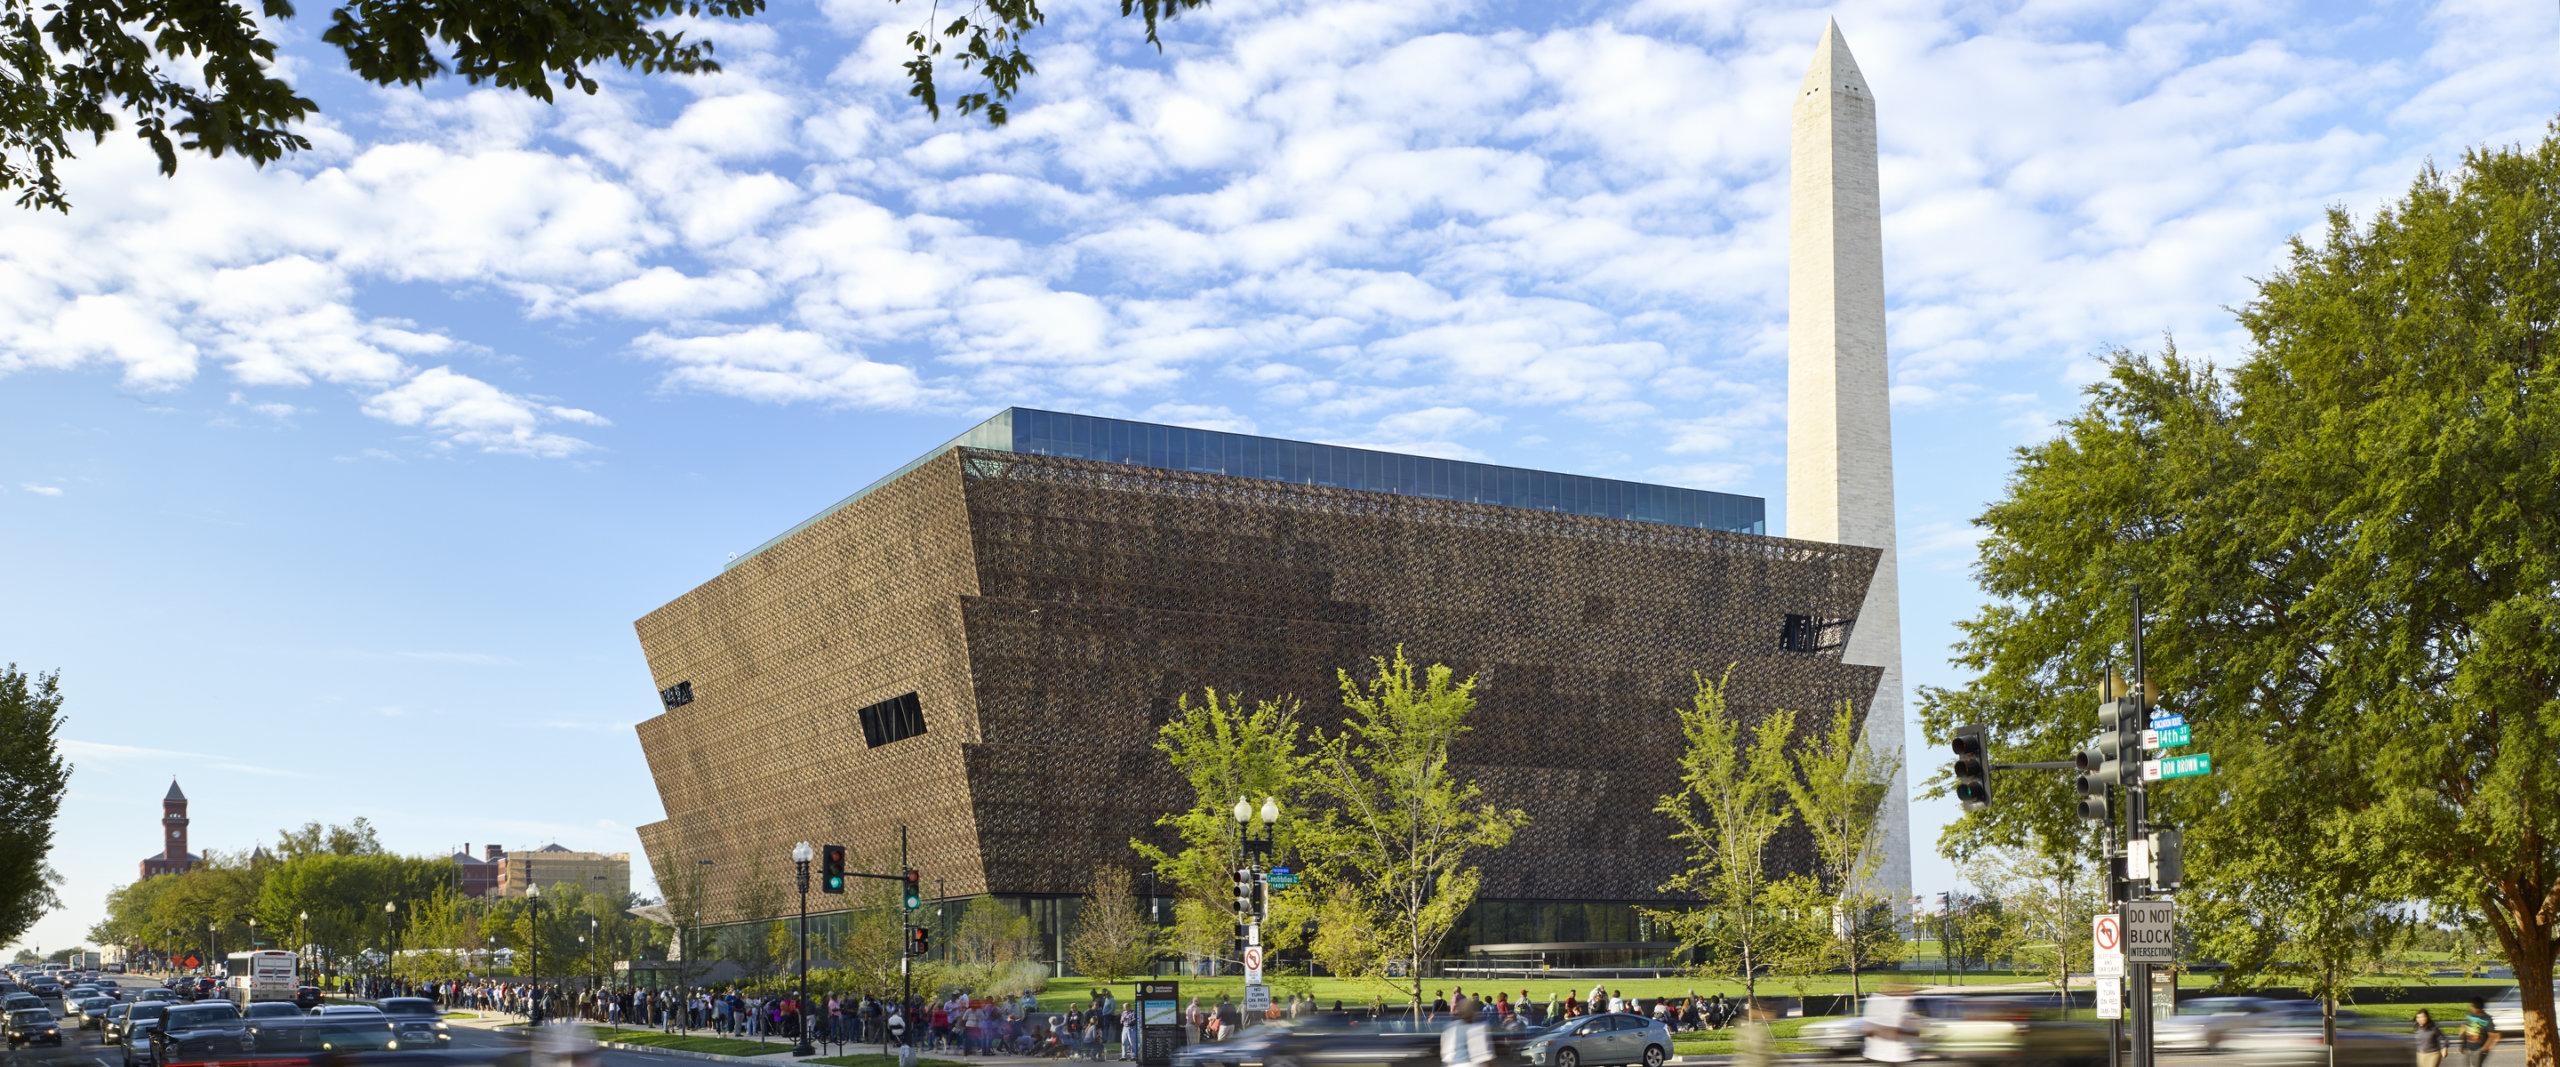 Exterior photo of the NMAAHC with the Washington Monument in the background